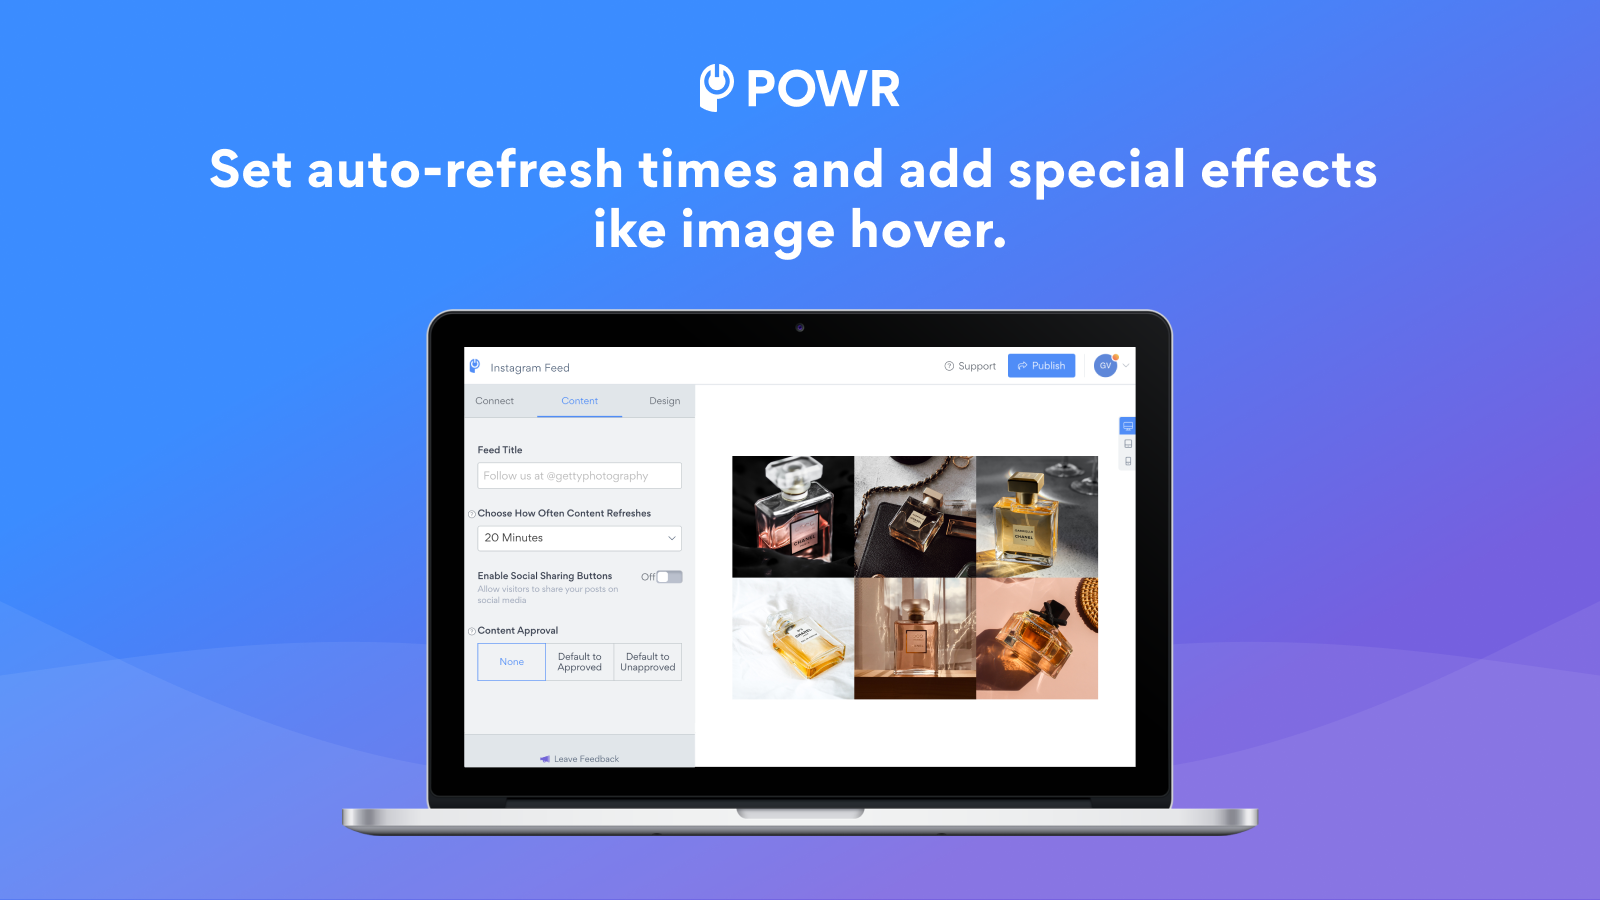 Auto-refresh your Instagram feed and add image hover effects.